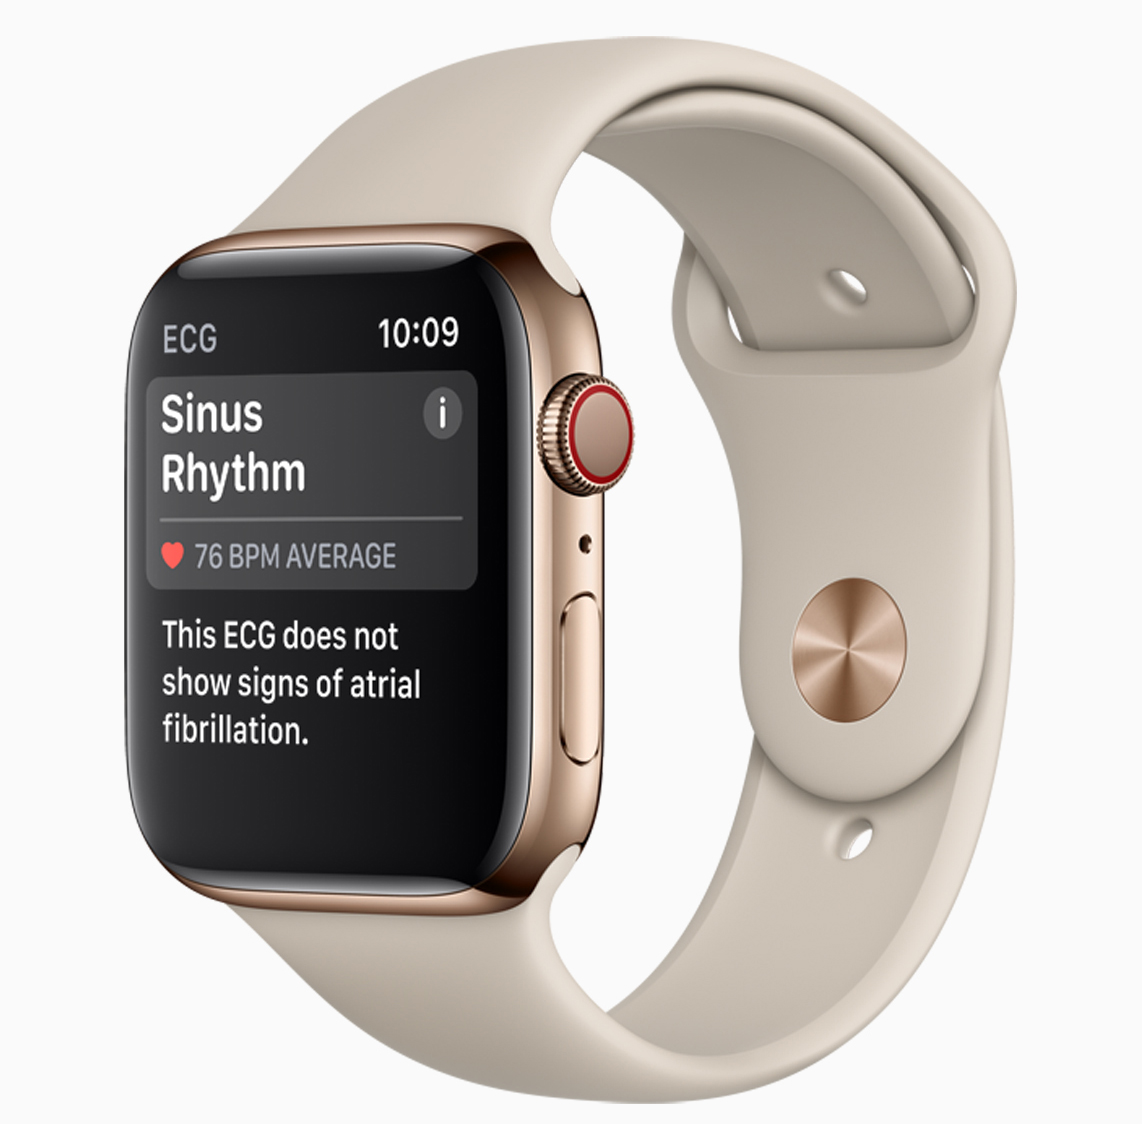 Are Apple Watch innovations good for consumers?